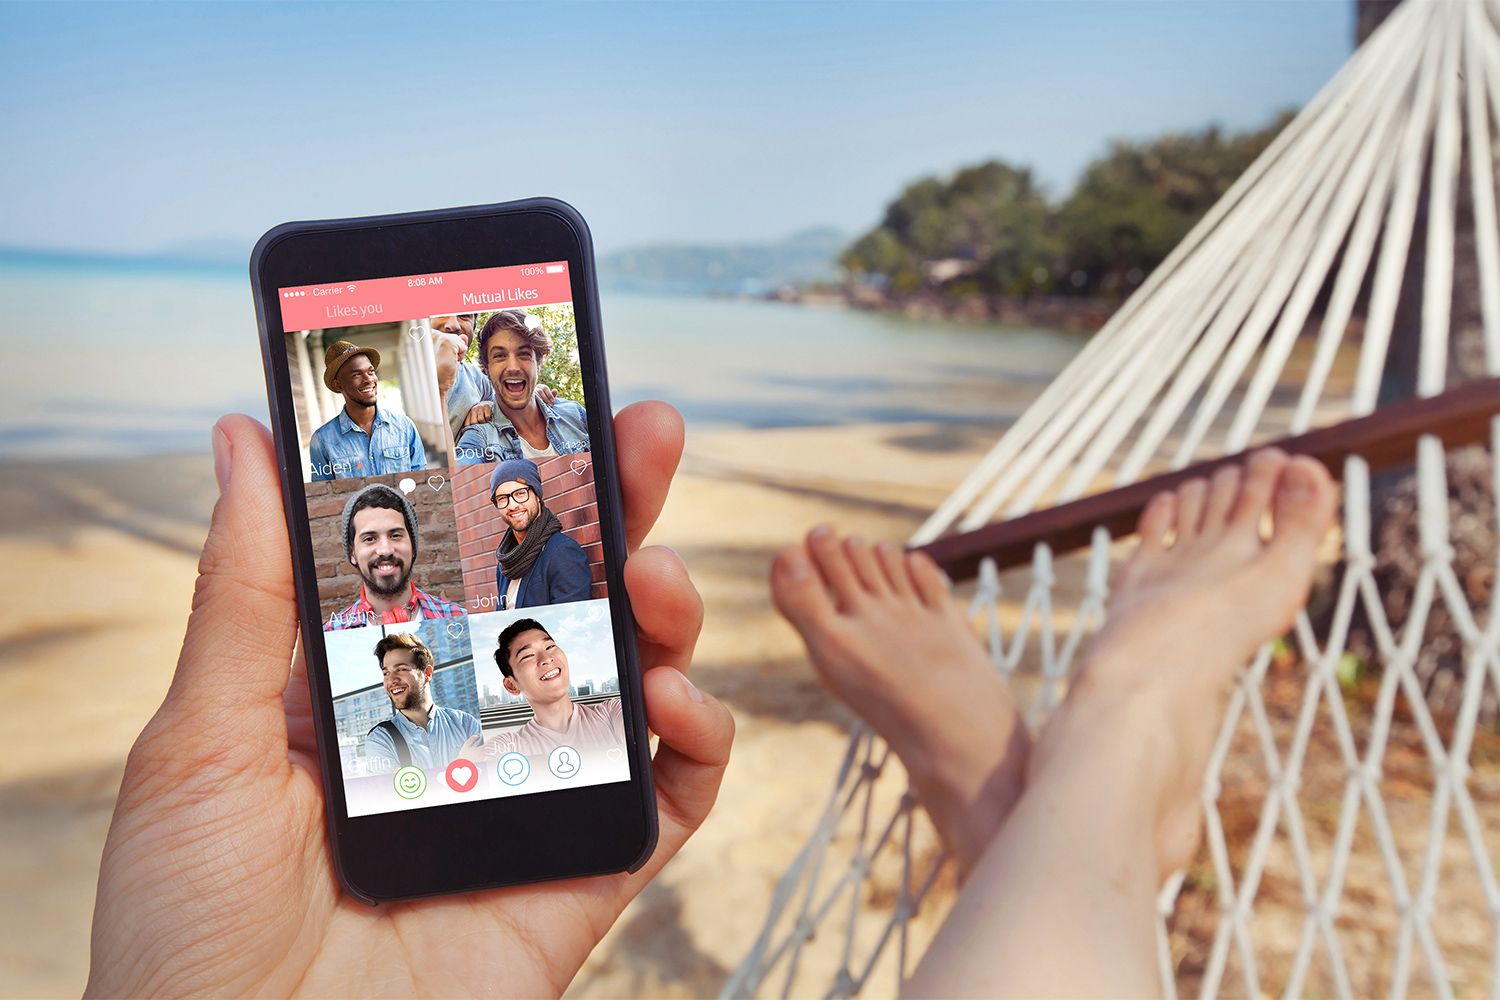 sweet pea dating app on the beach